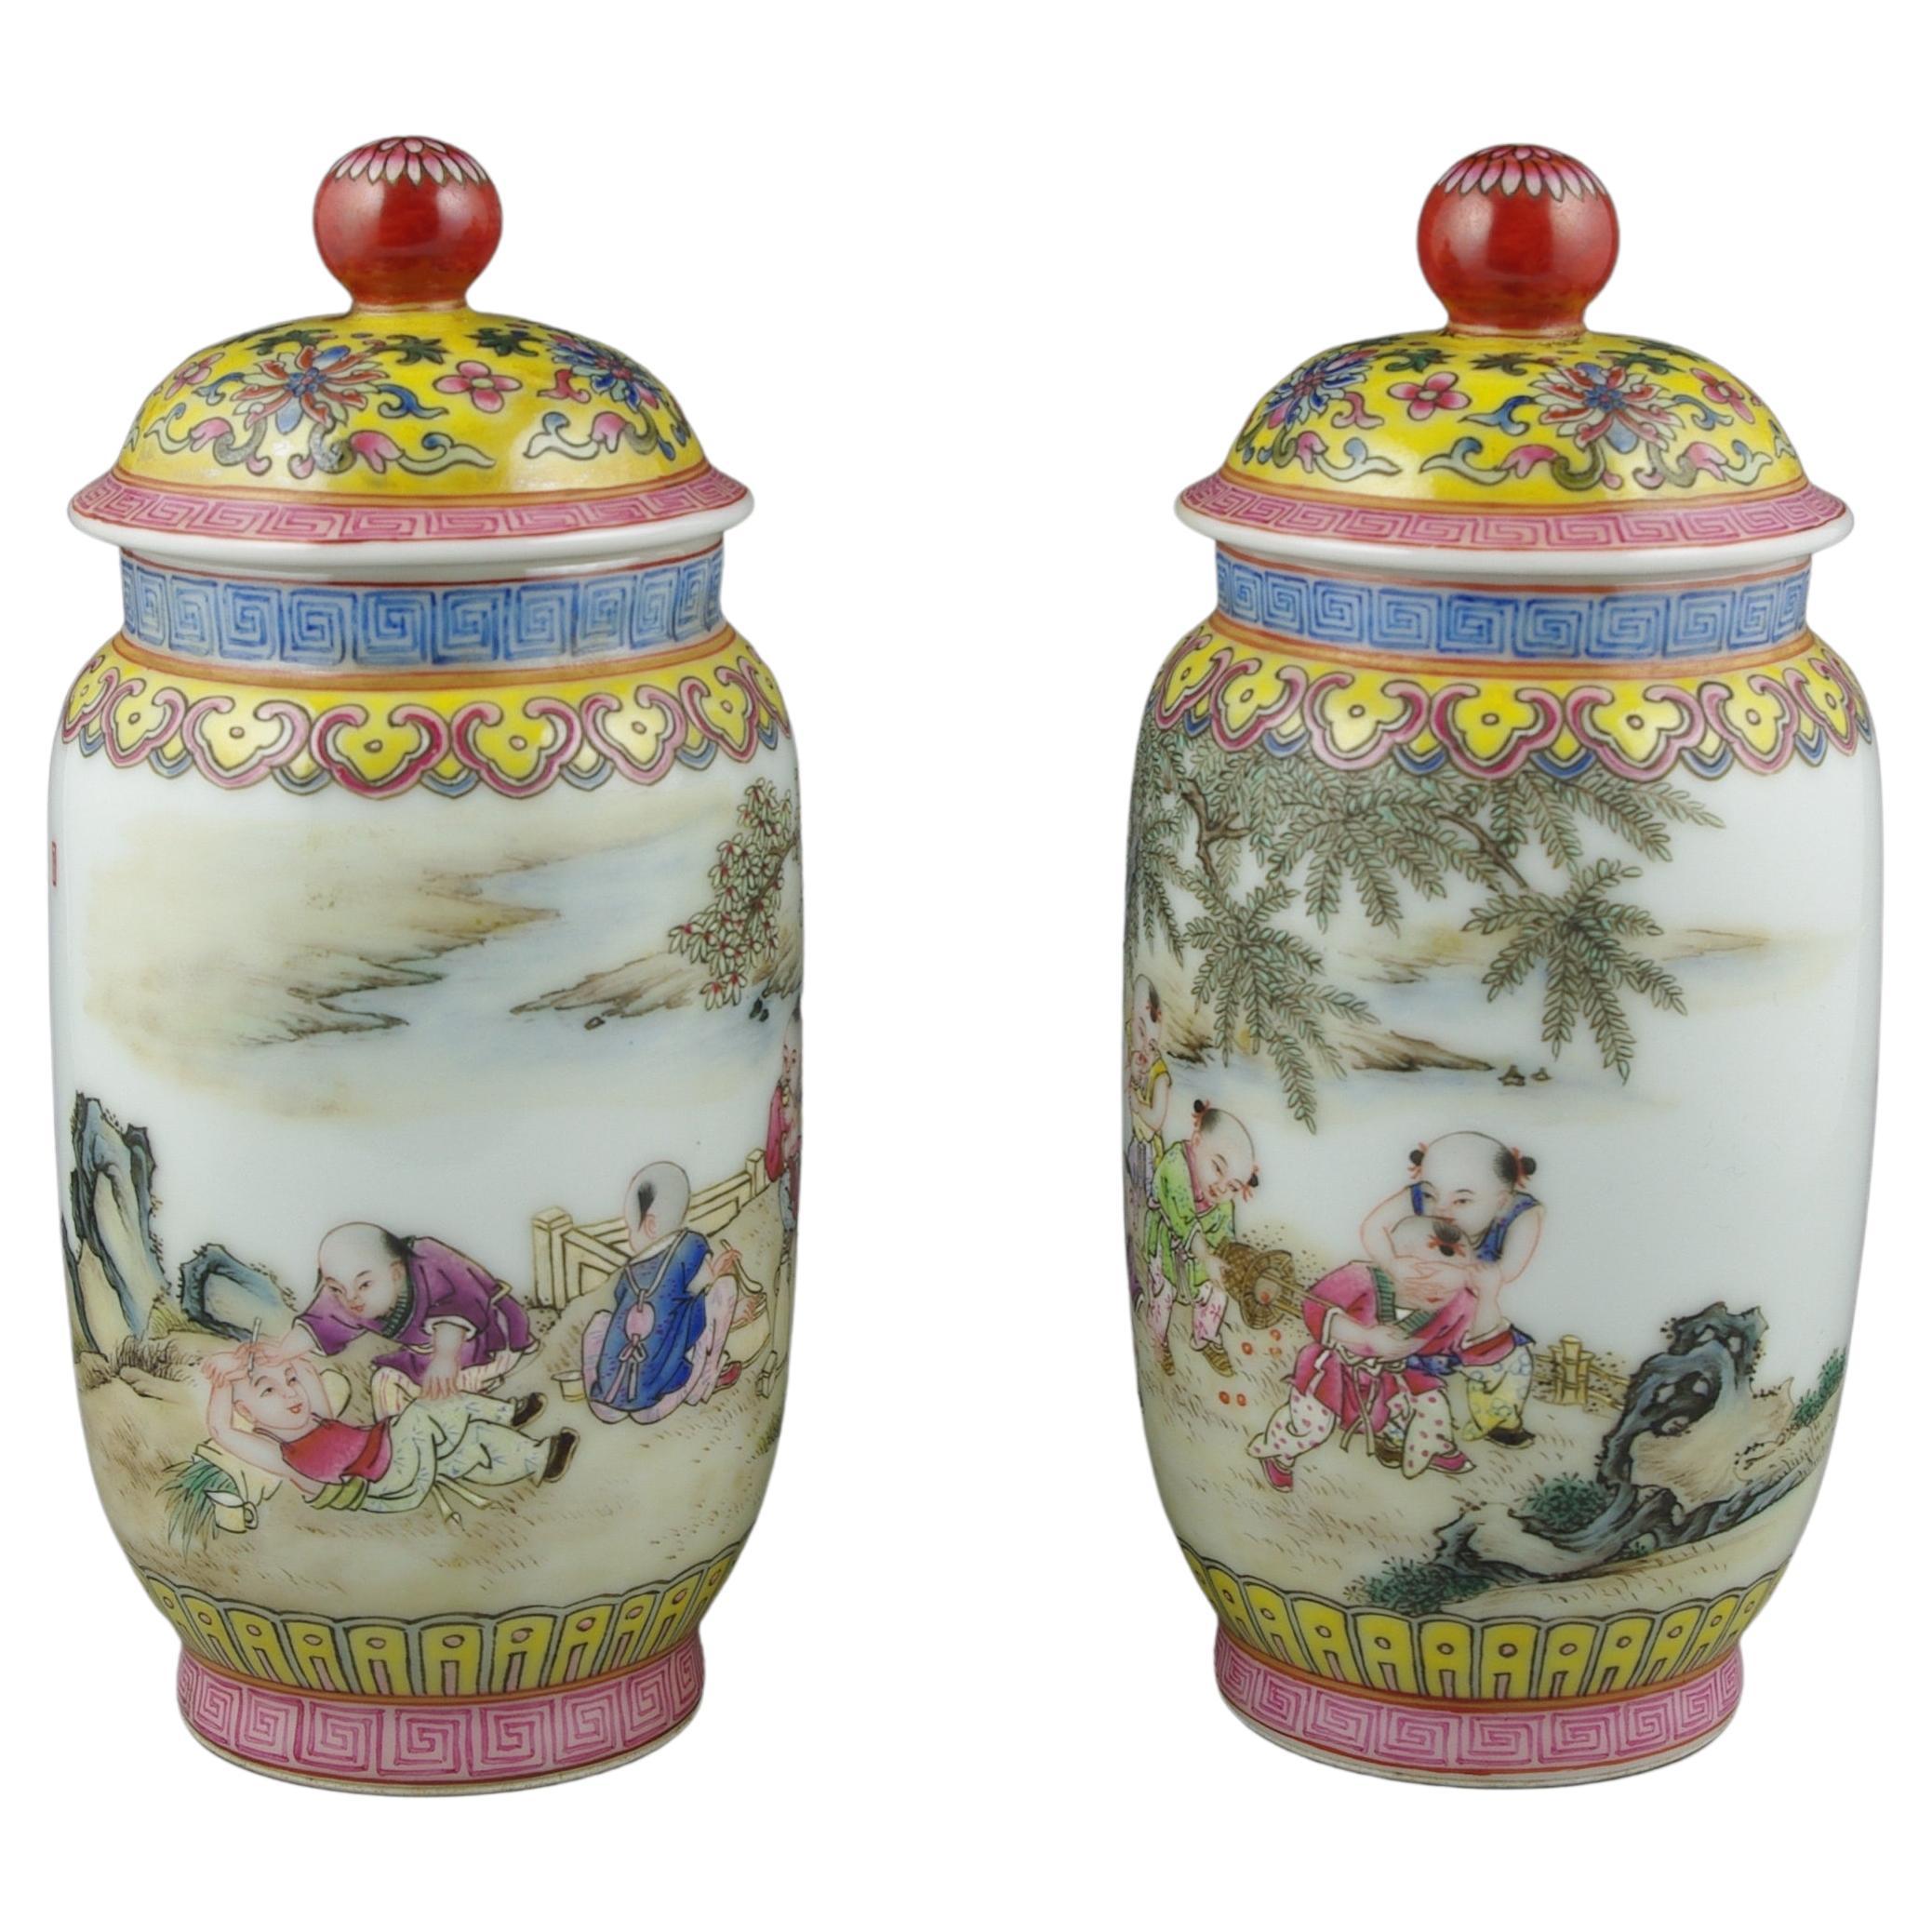 An exquisite pair of Chinese covered jars, a splendid representation of the rich tapestry of Chinese artistry and finest craftsmanship. Each jar serves as a vibrant canvas that narrates a delightful tale of childhood, depicted through the lively